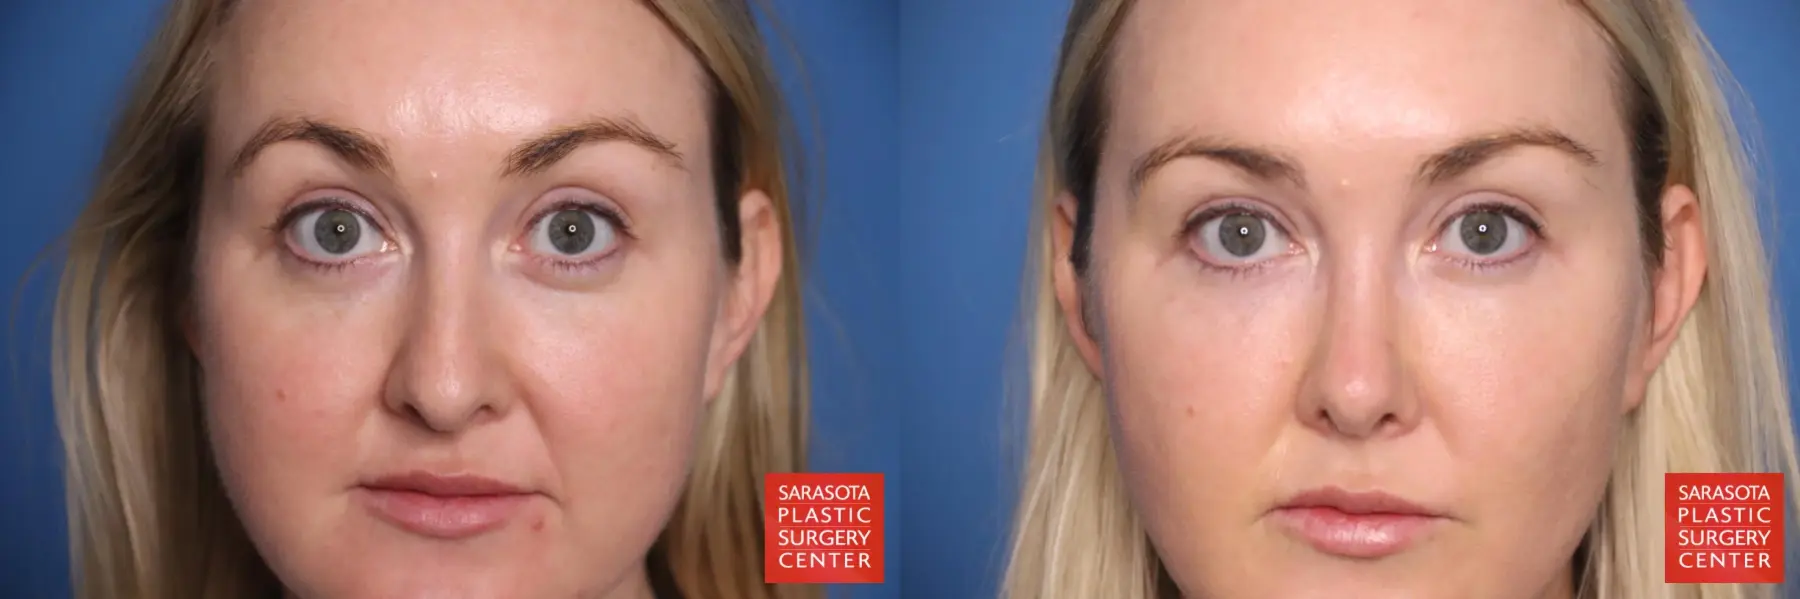 Rhinoplasty: Patient 4 - Before and After 2